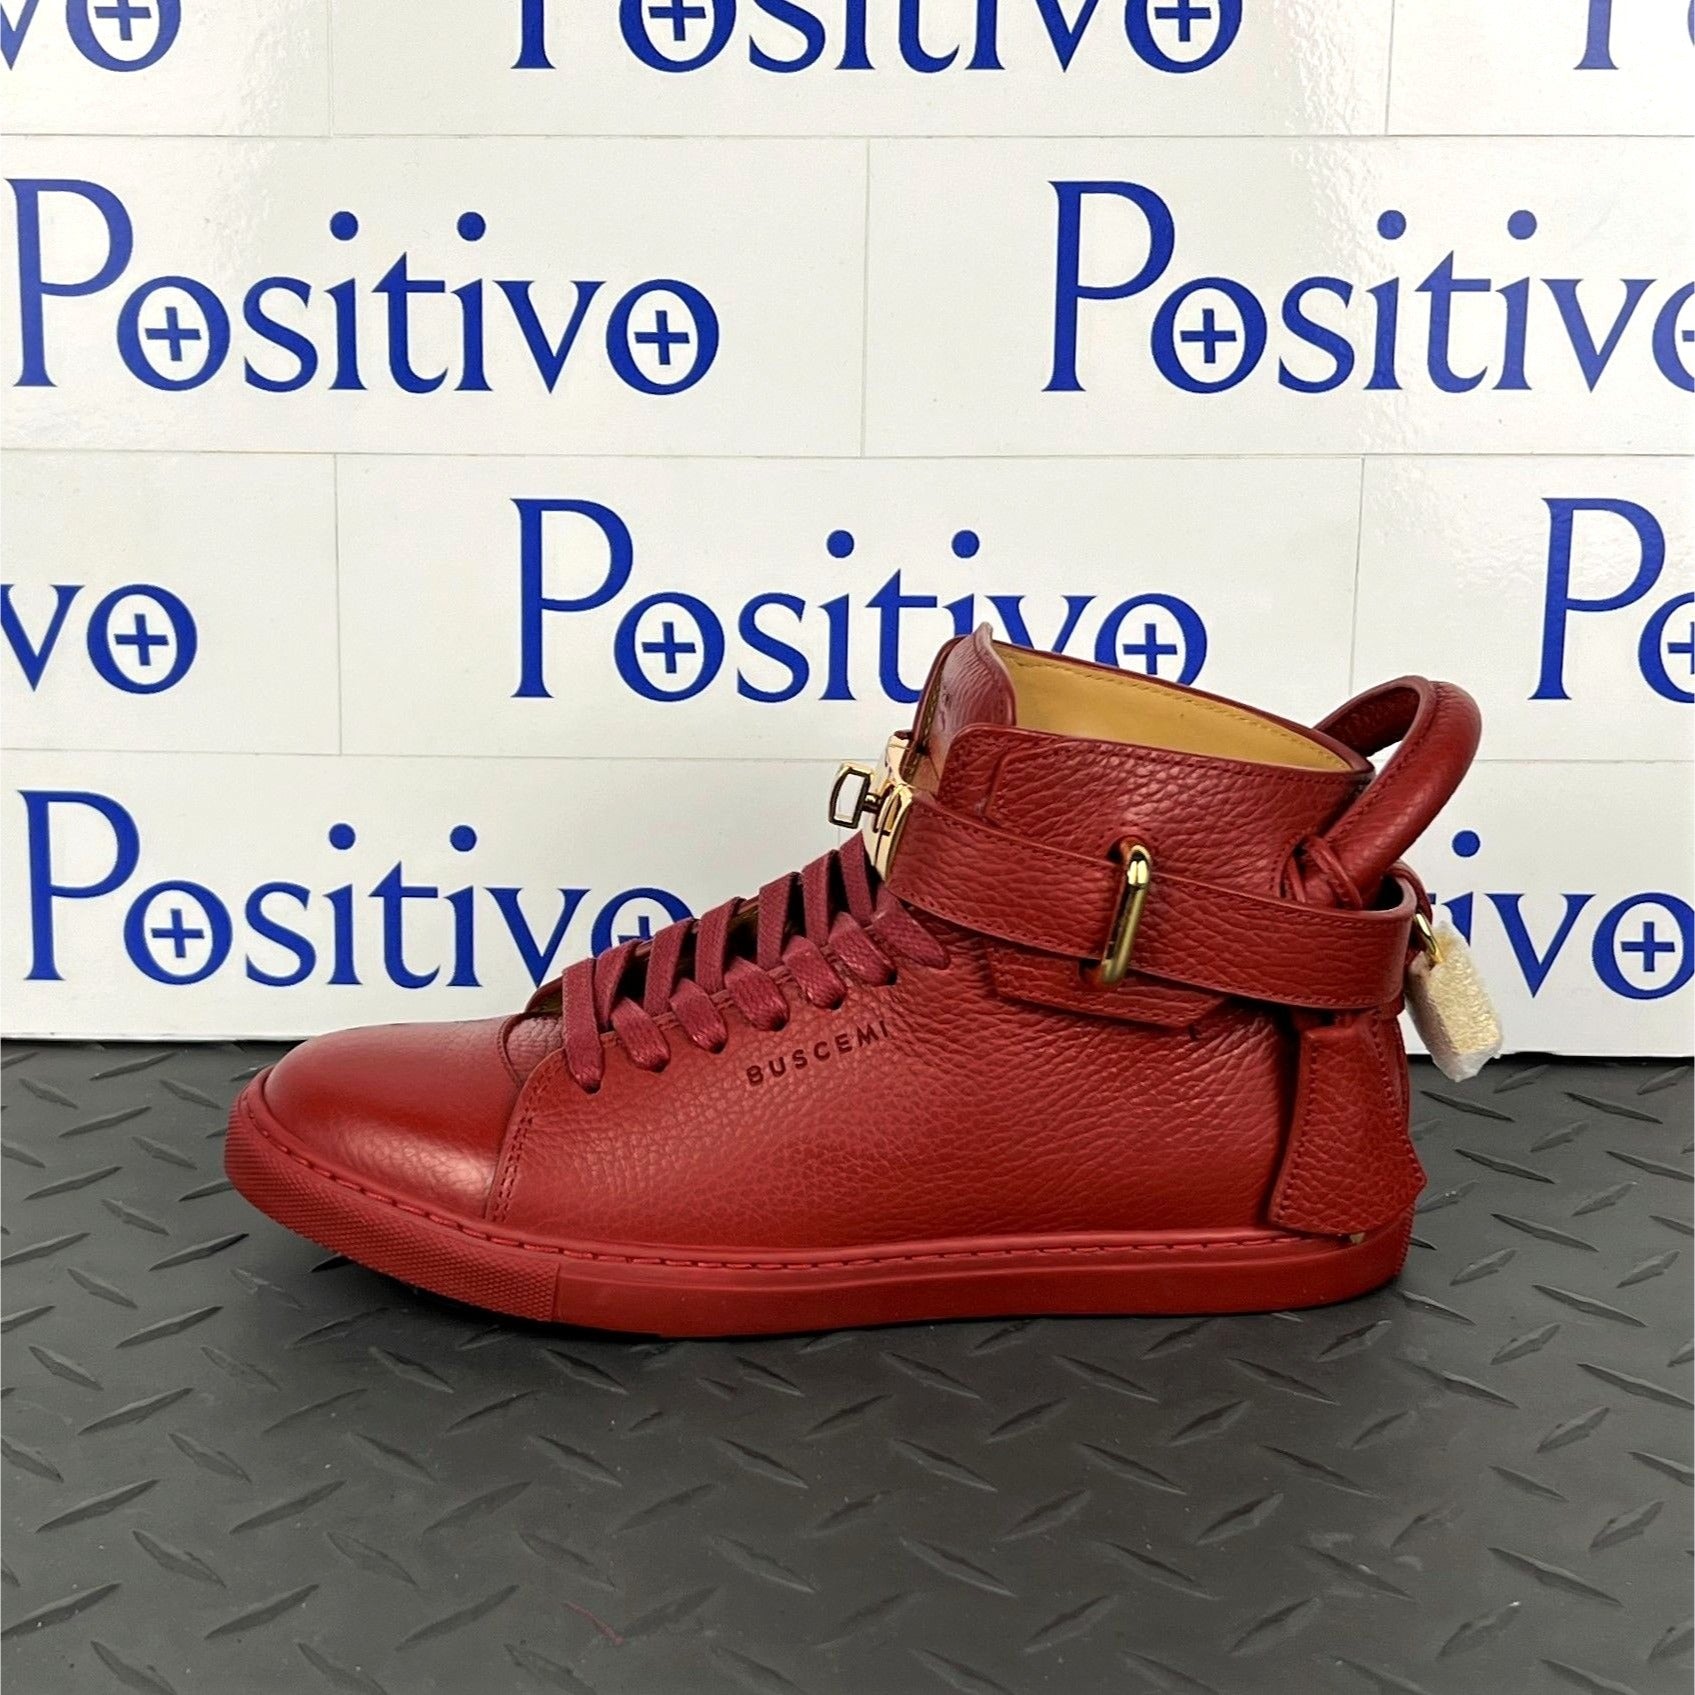 Buscemi Womens 100MM Flat Guts/Guts Leather Sneakers | Positivo Clothing